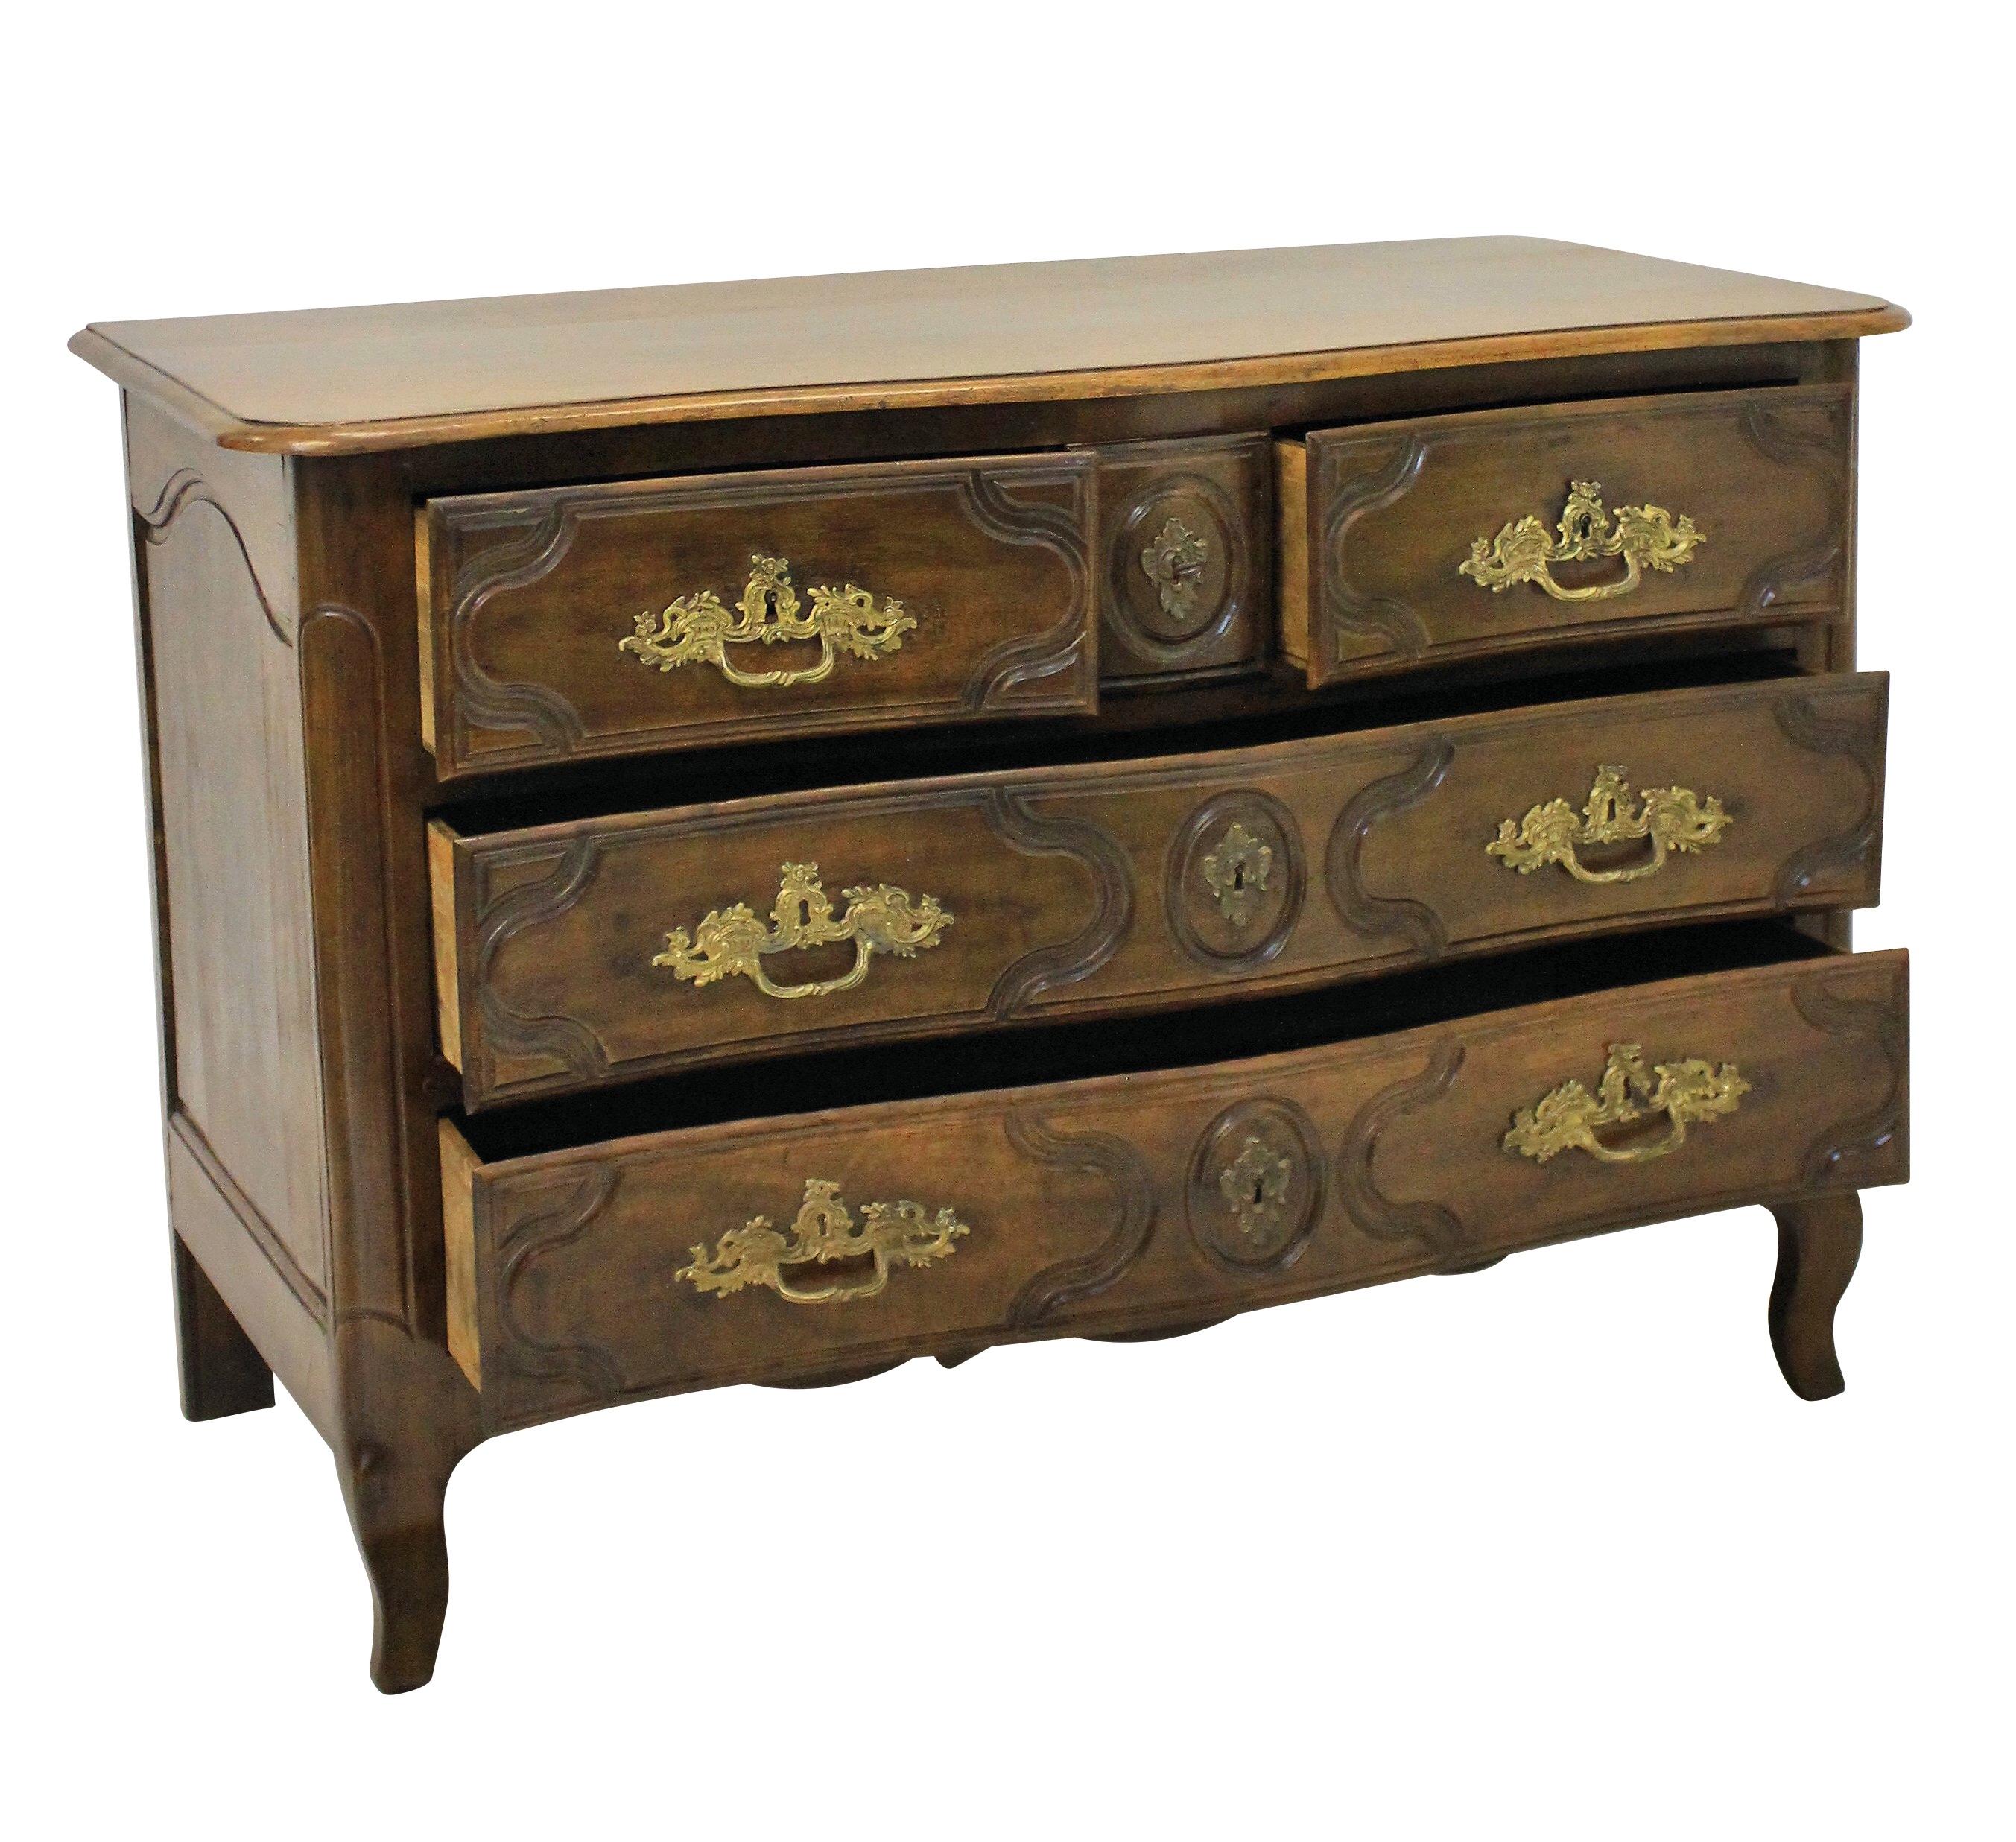 An 18th century French Provincial walnut commode, with serpentine front and five-drawers. The original handles in gilt bronze, overall with a great patina.

 